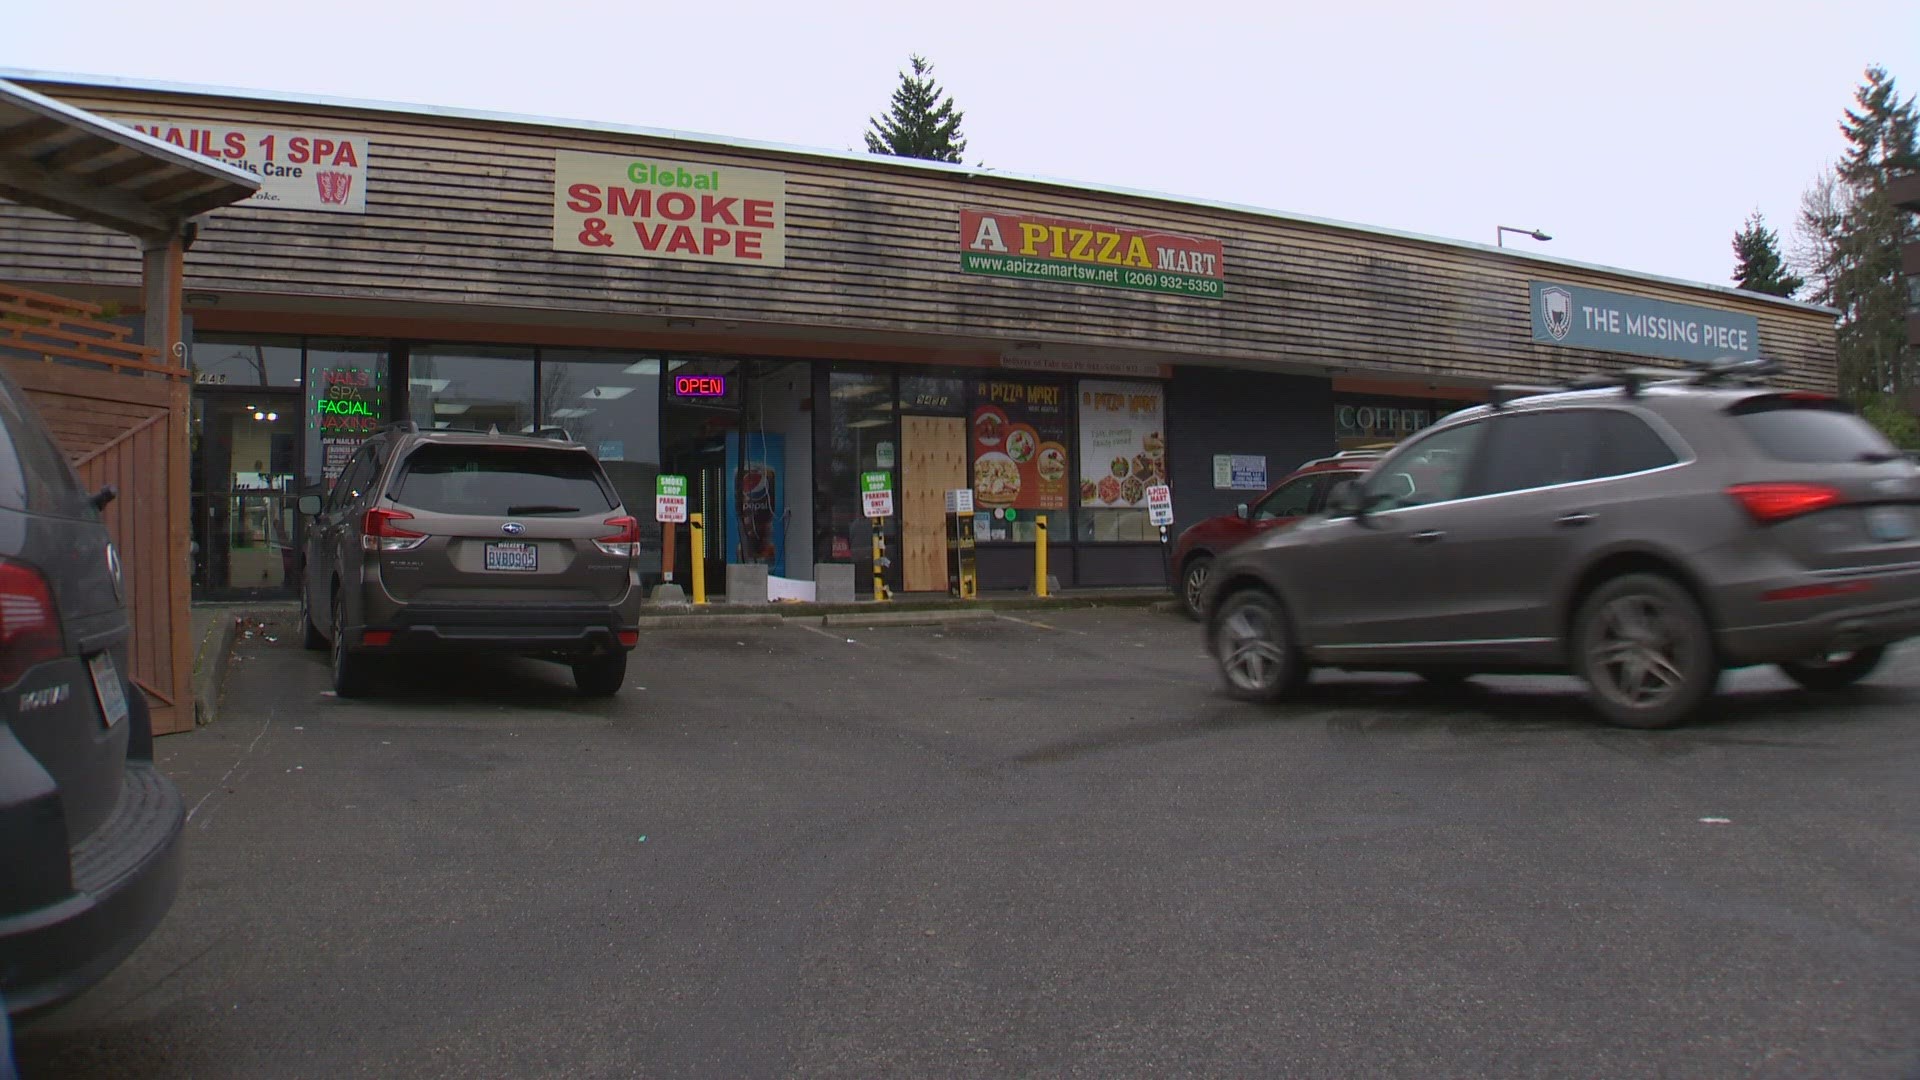 Two businesses, a pizza place and a smoke and vape shop, have been shelling out thousands of dollars after each incident.